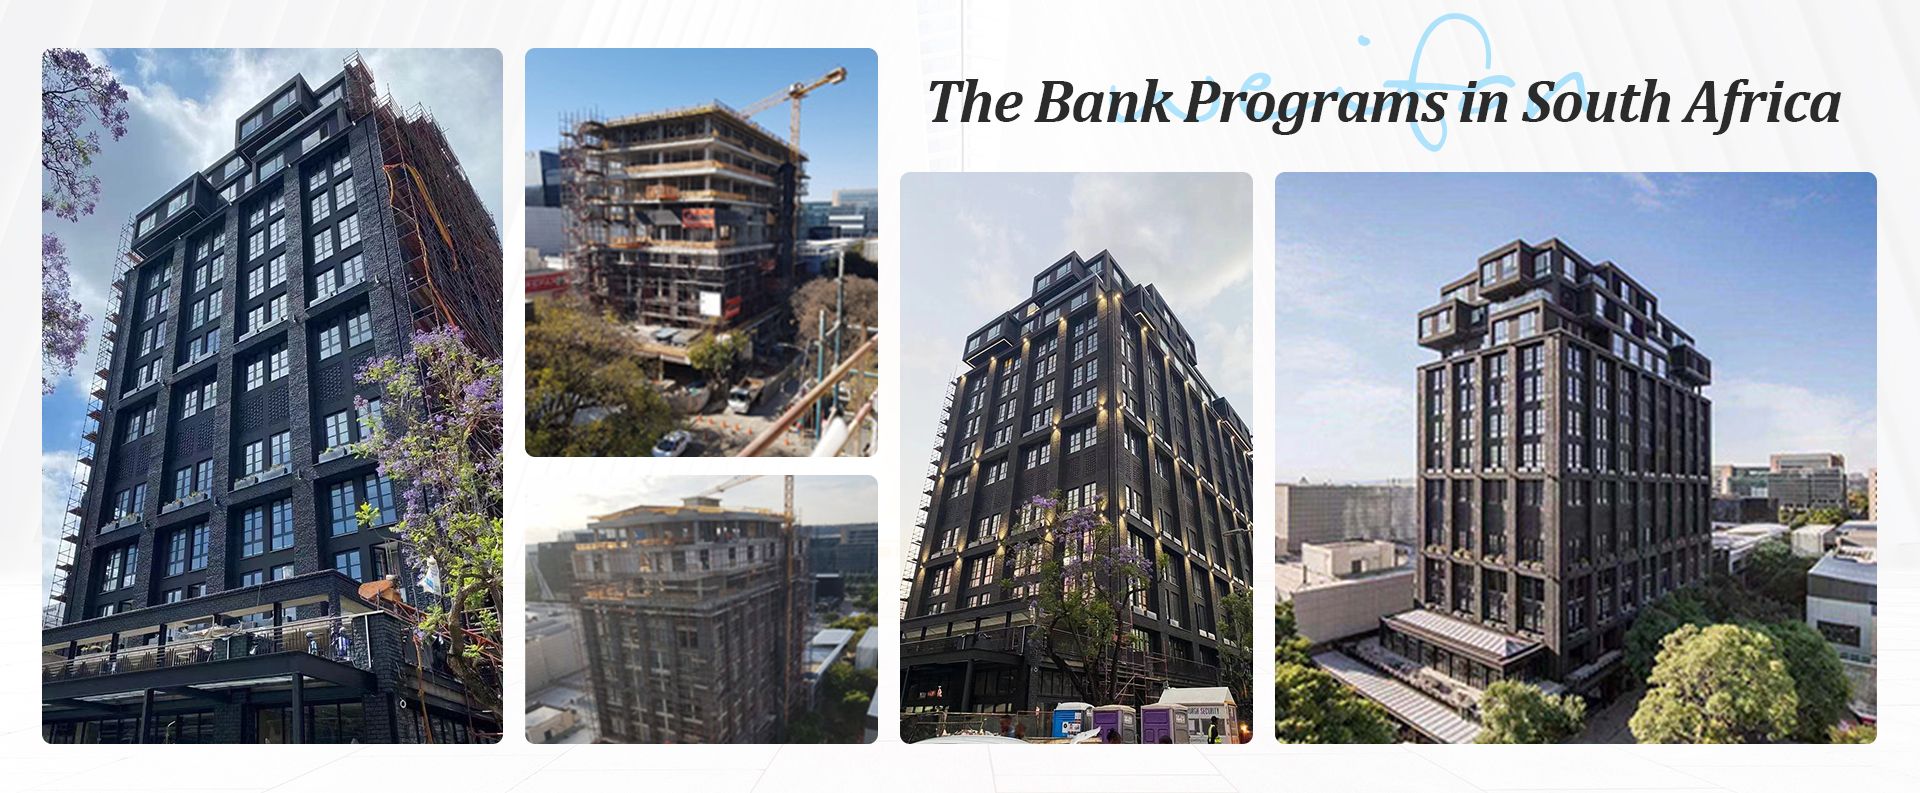 The Bank Programs in South Africa